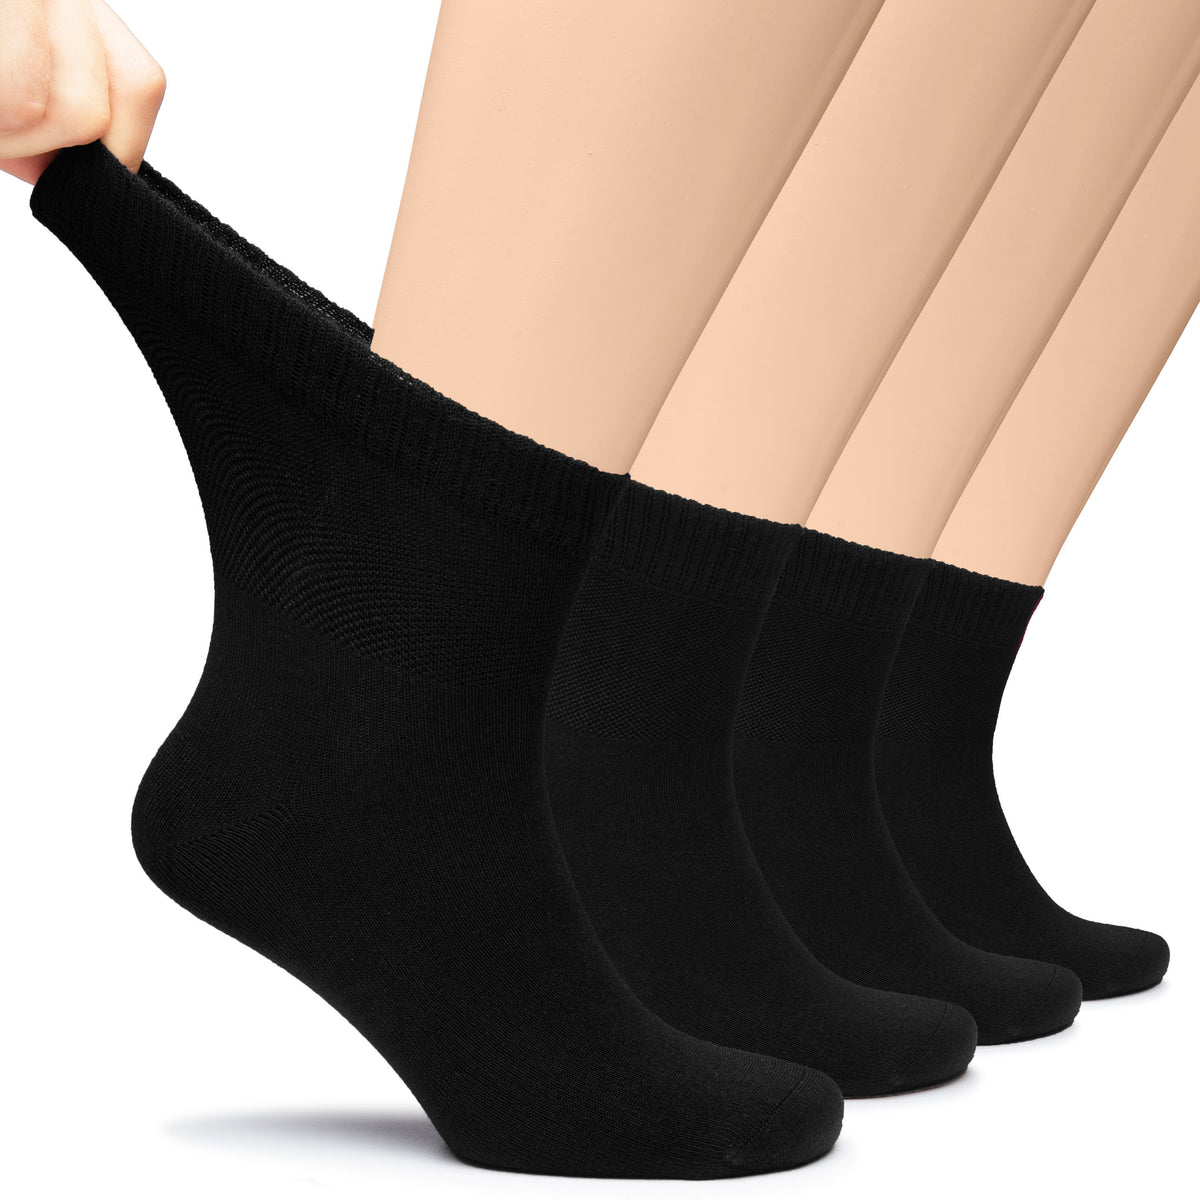 These Men's Bamboo Diabetic Socks feature a man's foot, showcasing their black color and specialized design for those with diabetes.